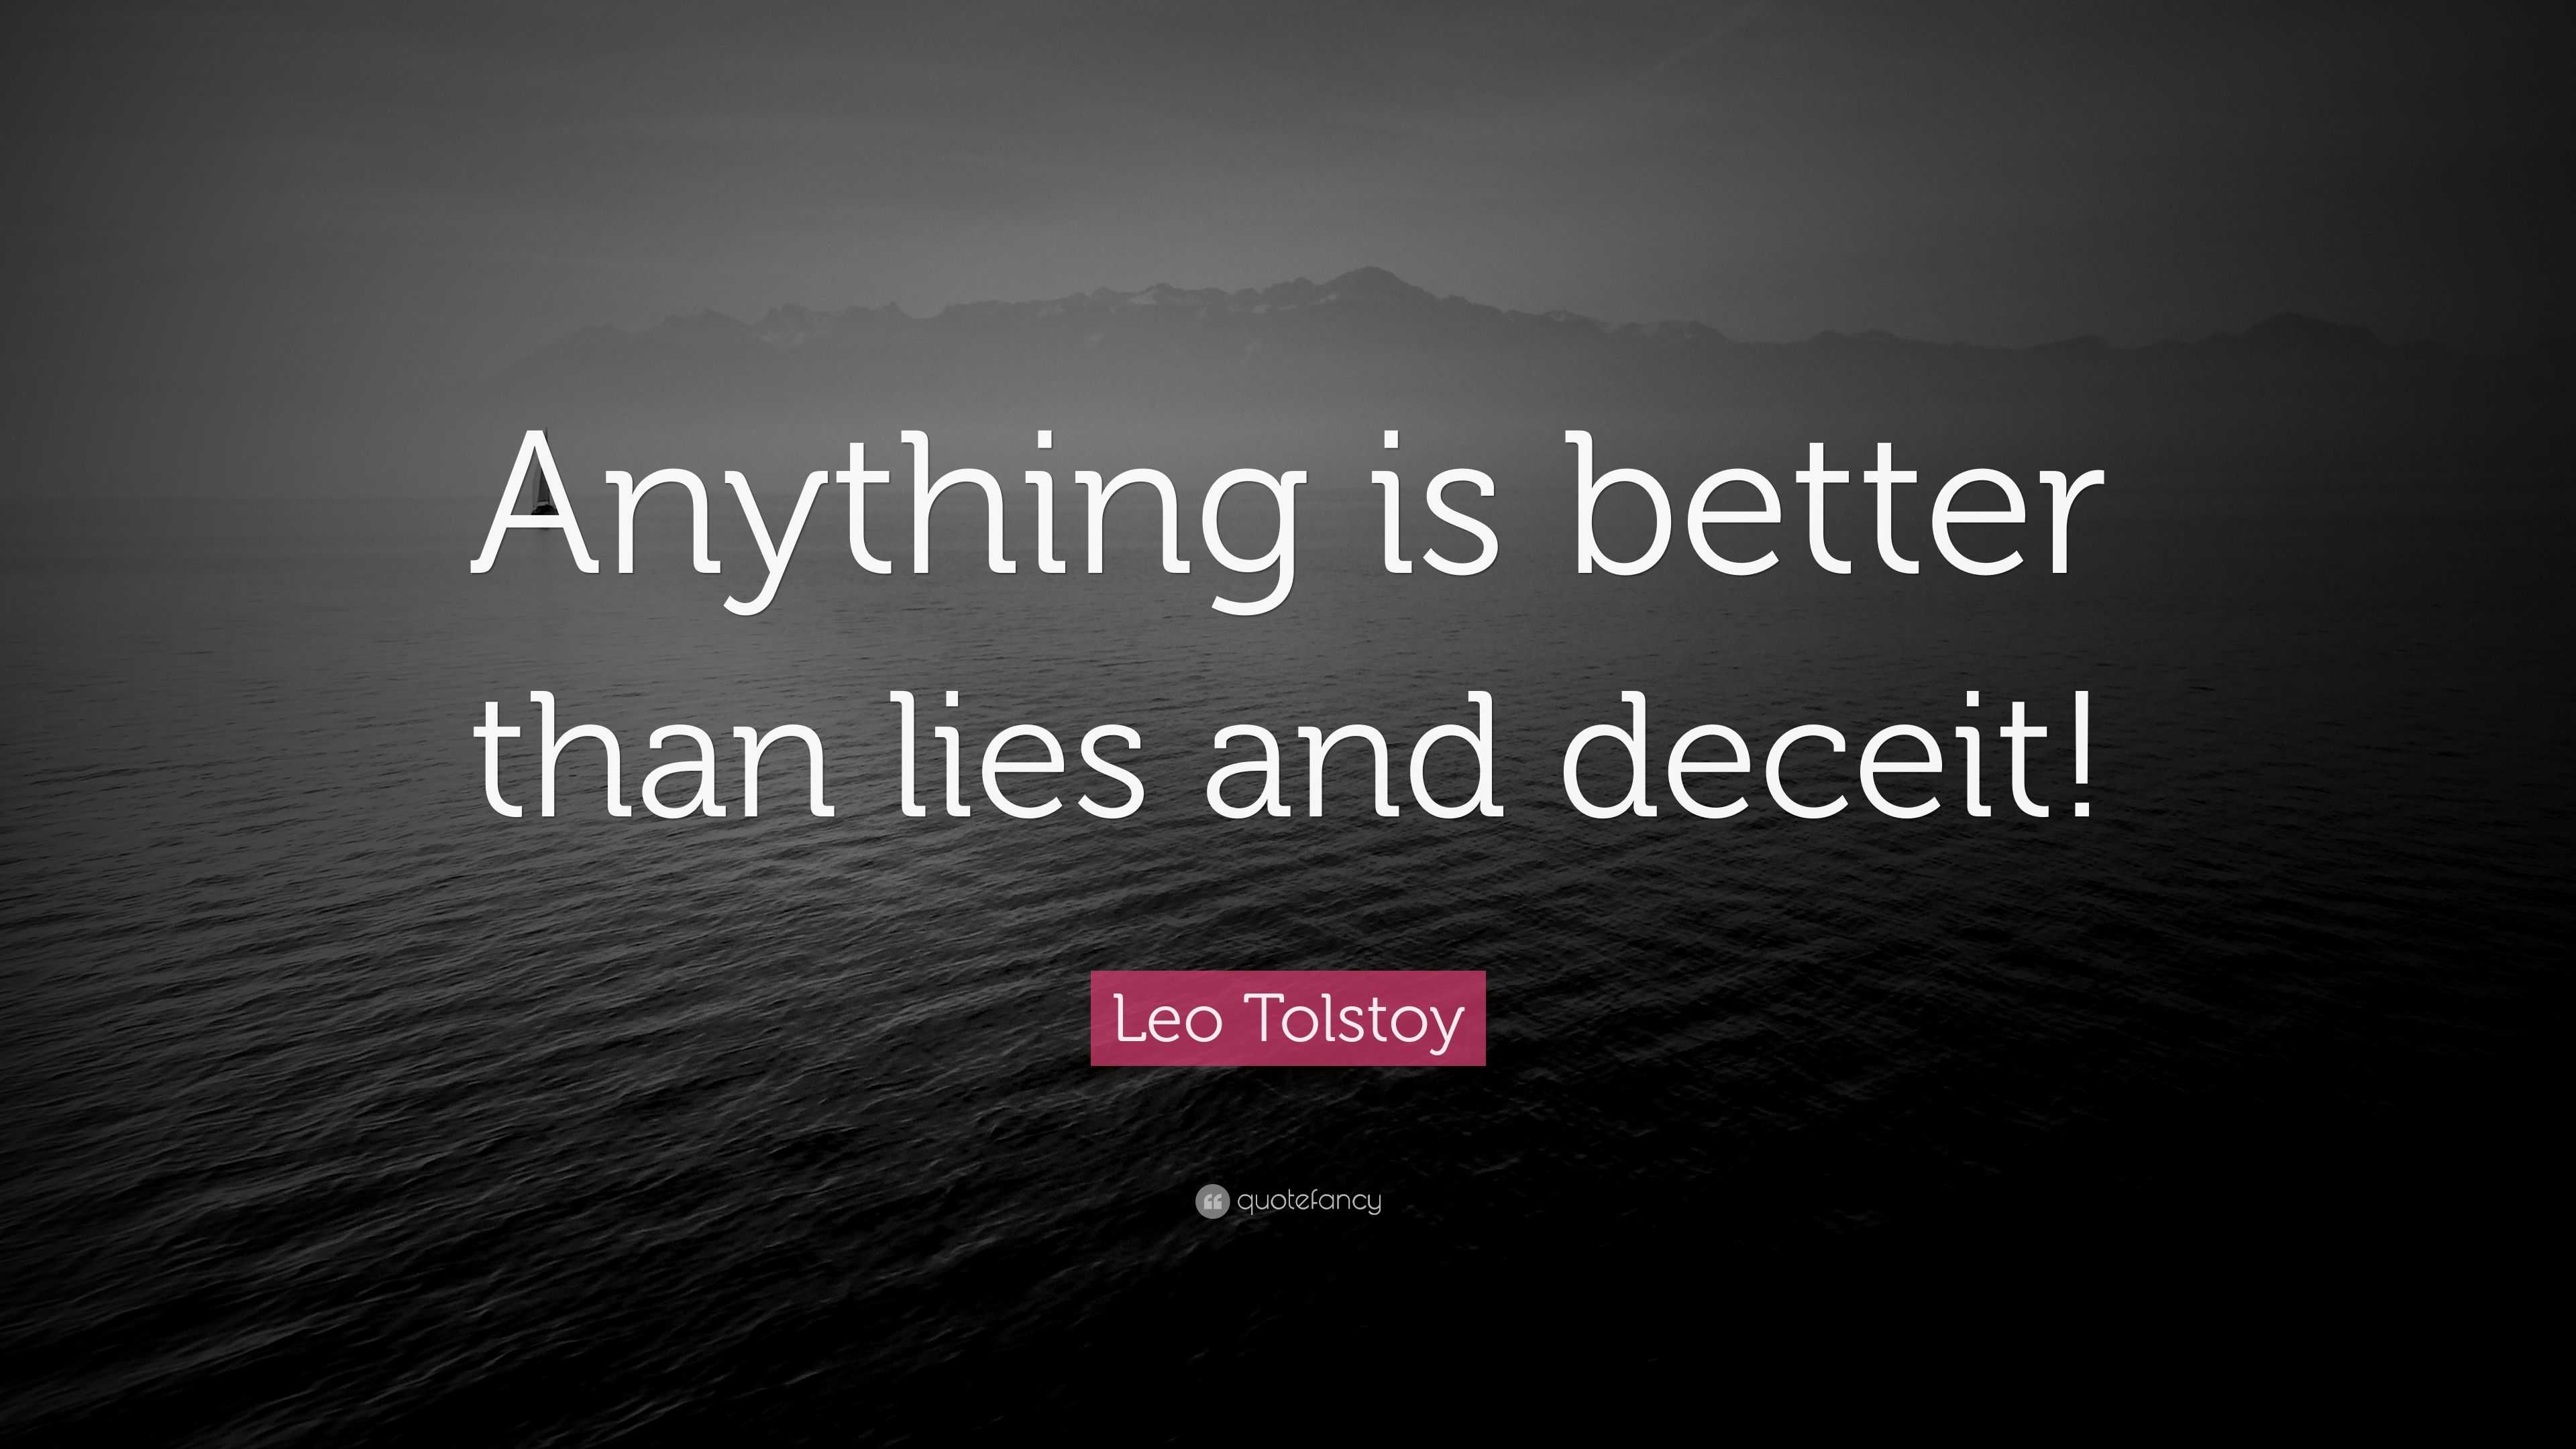 Leo Tolstoy Quote: "Anything is better than lies and deceit!"